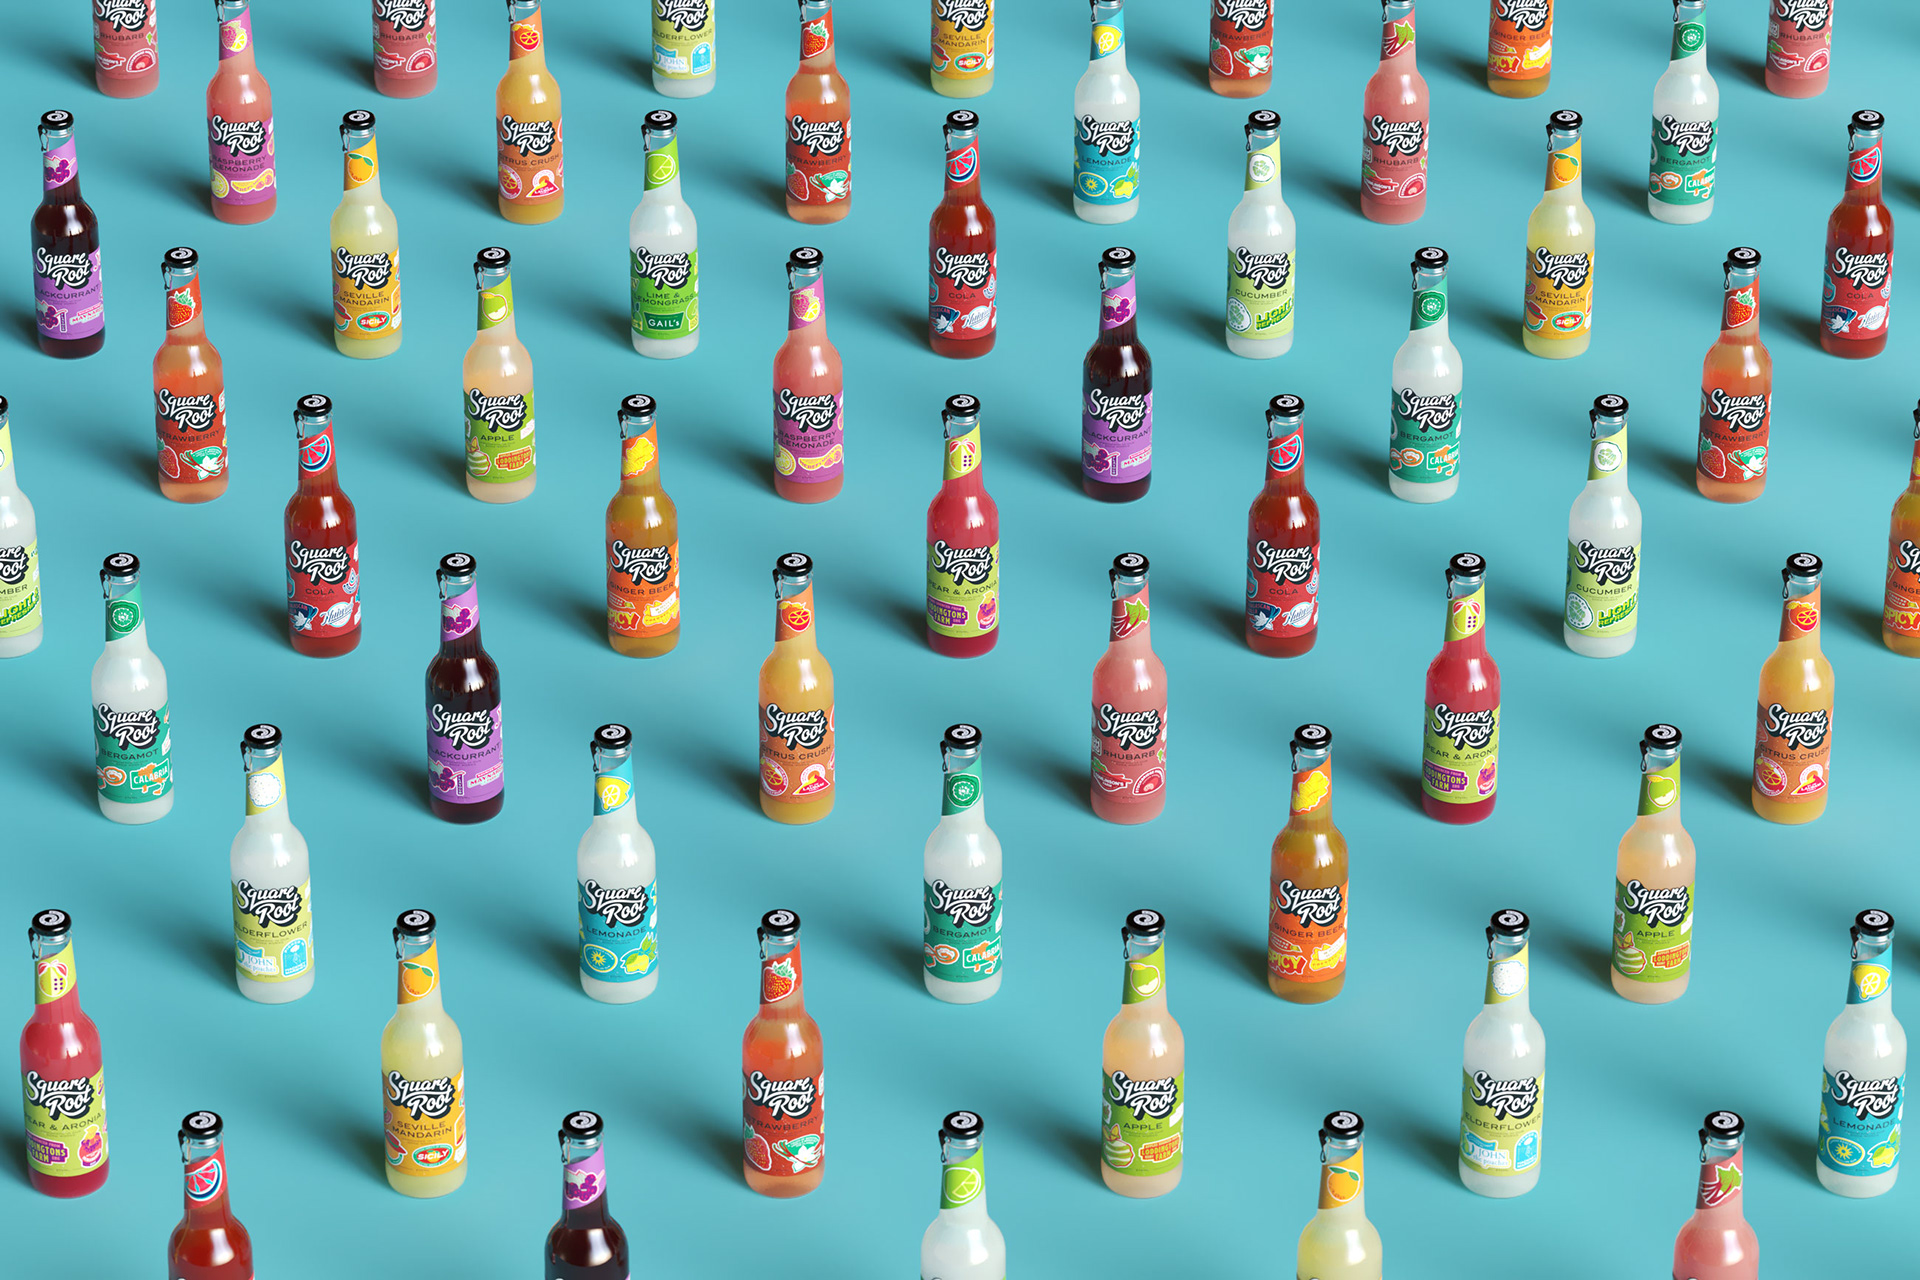 Square Root Soda x Thirst Craft on Behance